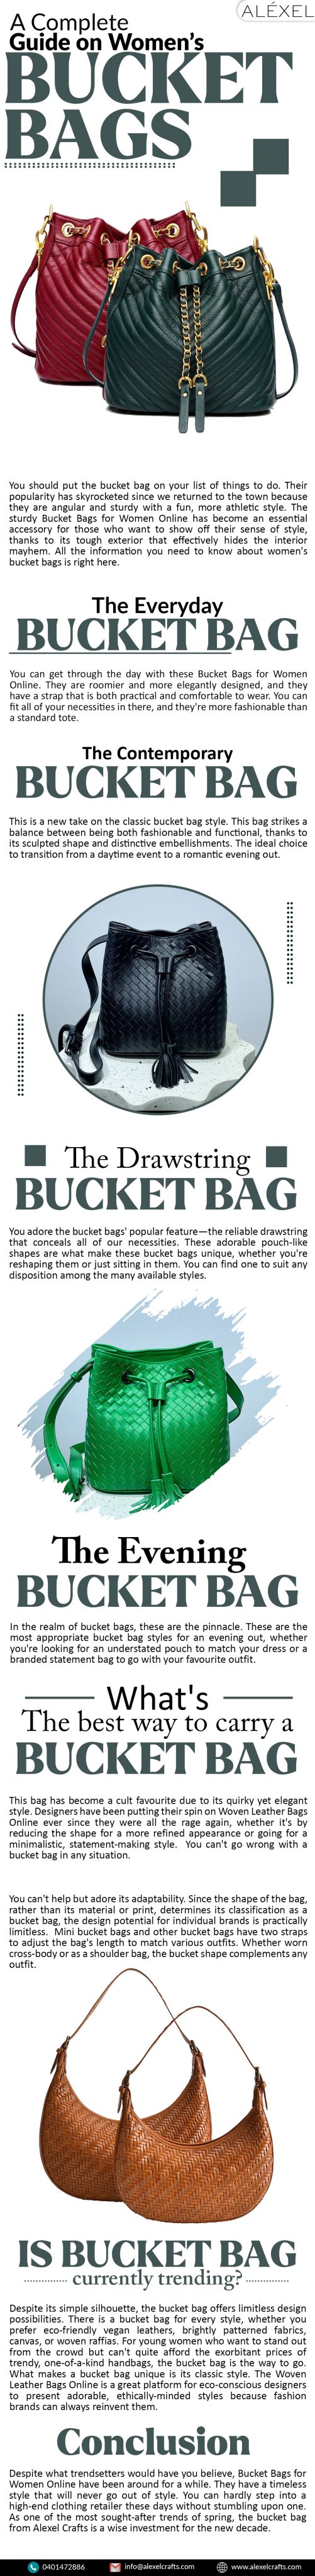 A Complete Guide on Women’s Bucket Bags